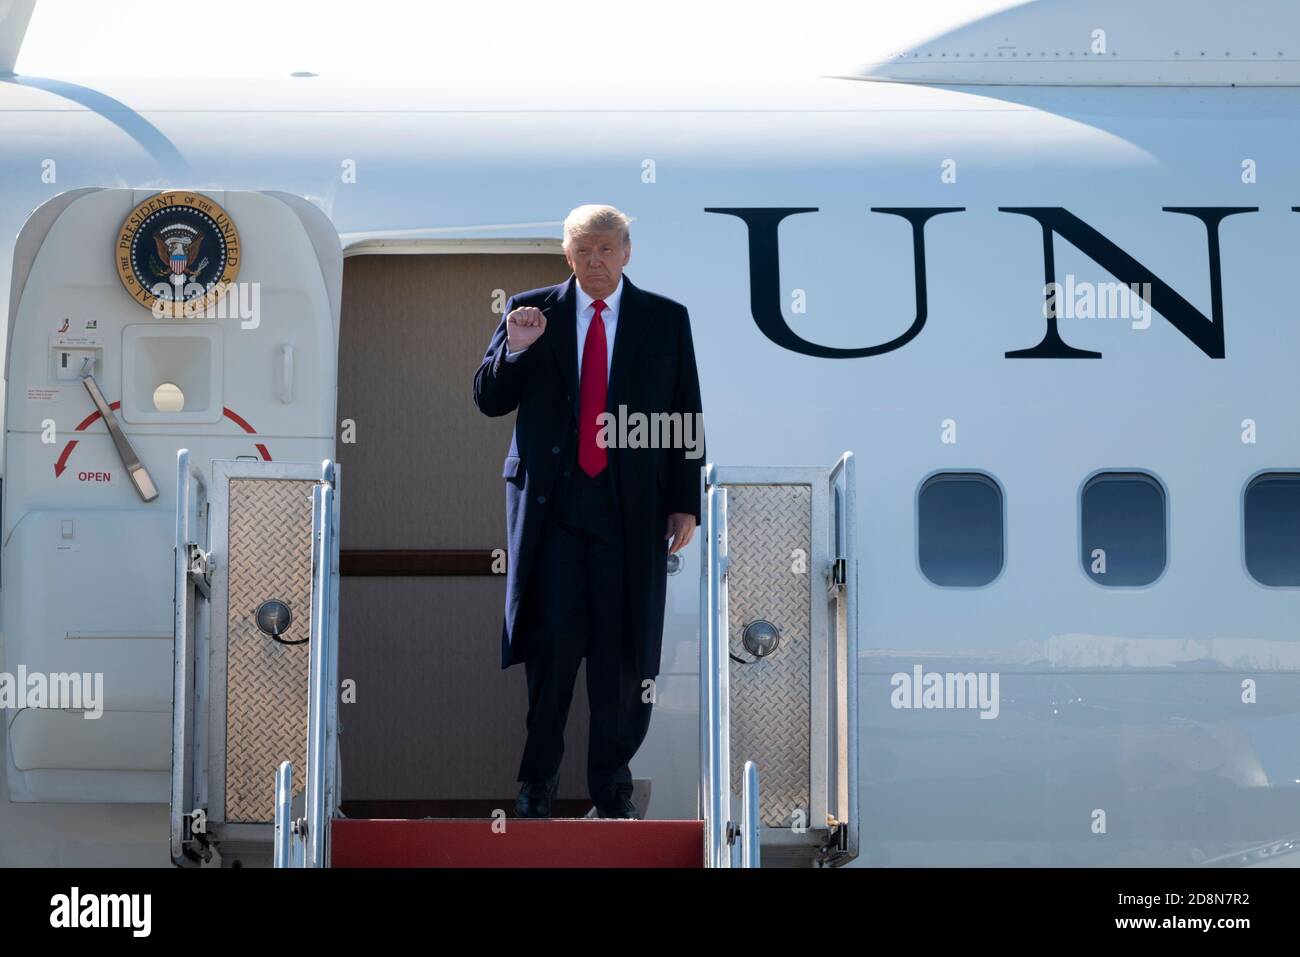 Ewing, New Jersey, USA. October 31, 2020: U.S. President Donald J. Trump is shown on Air Force one after landing at Trenton Mercer Airport in Ewing, N. J. Trump is campaigning in several towns in Pennsylvania including, Newtown, Butler and Reading, PA Credit: Brian Branch Price/ZUMA Wire/Alamy Live News Stock Photo